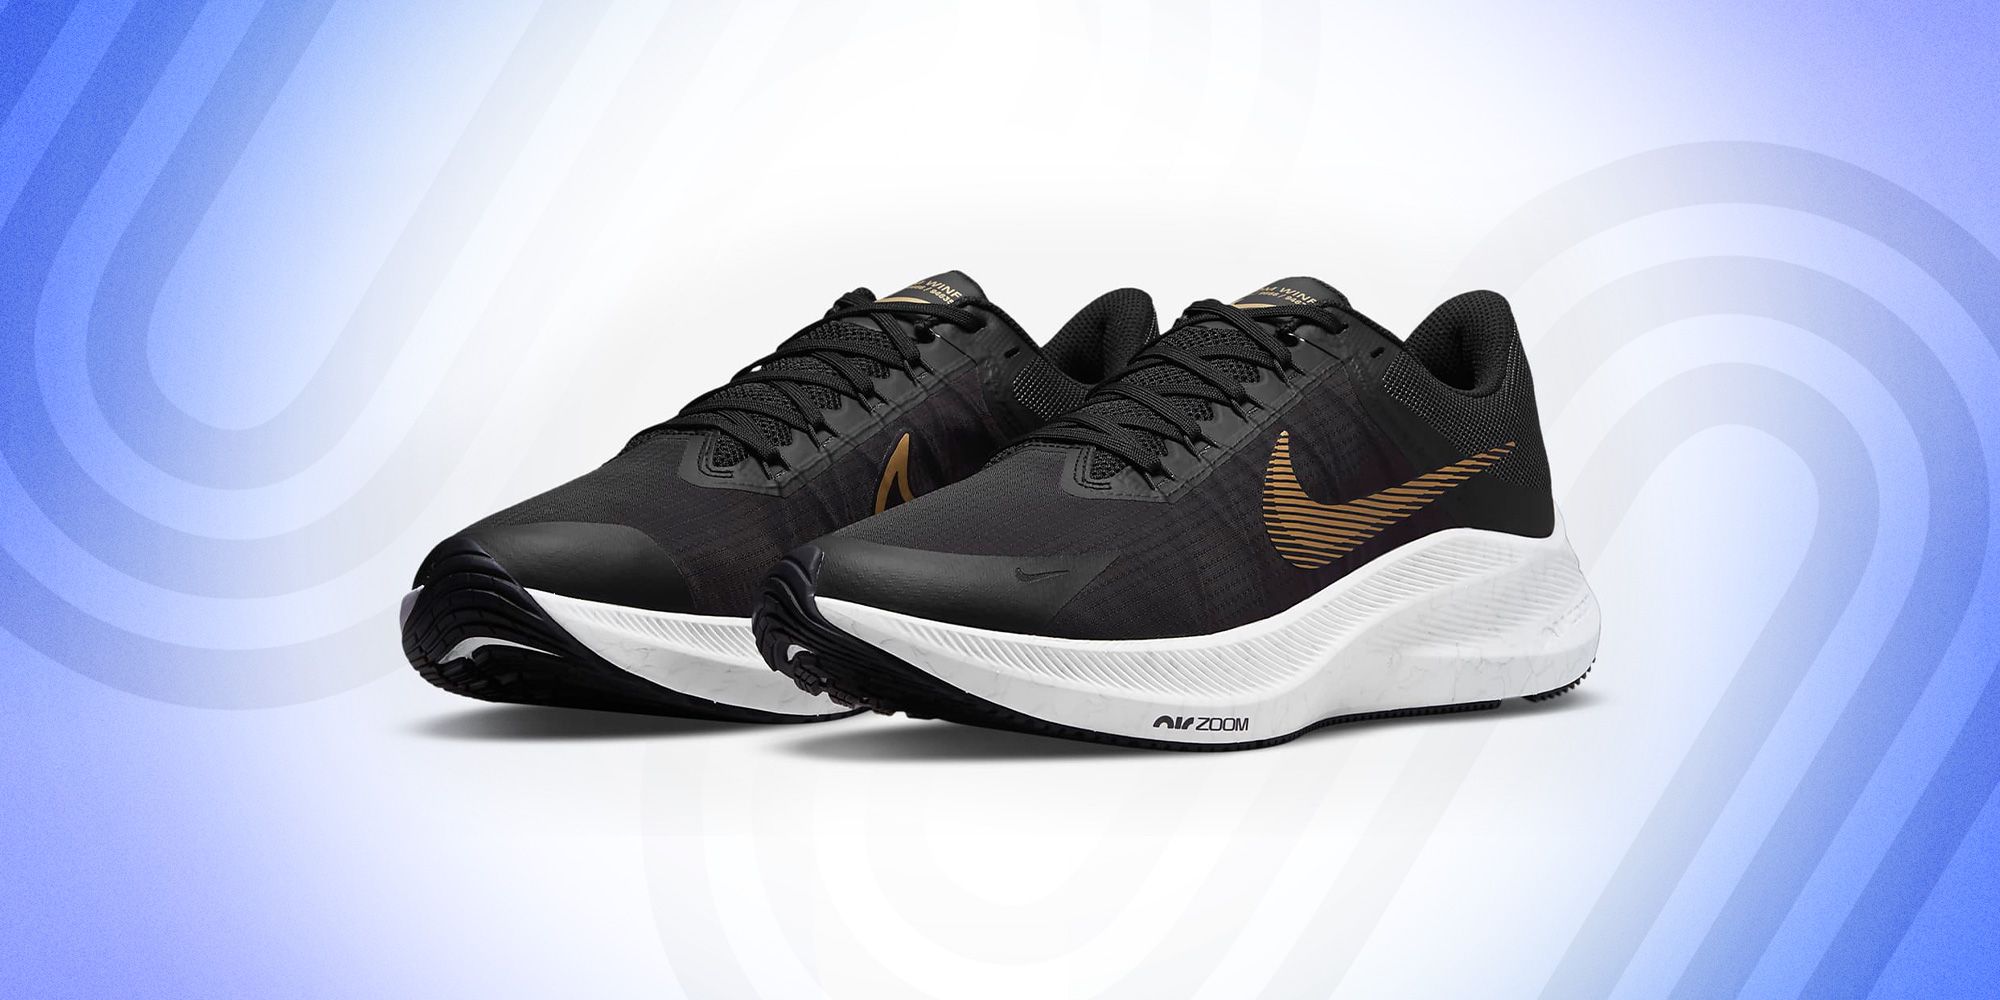 10 Best Nike Running Shoes of 2022 - Running Shoe Reviews